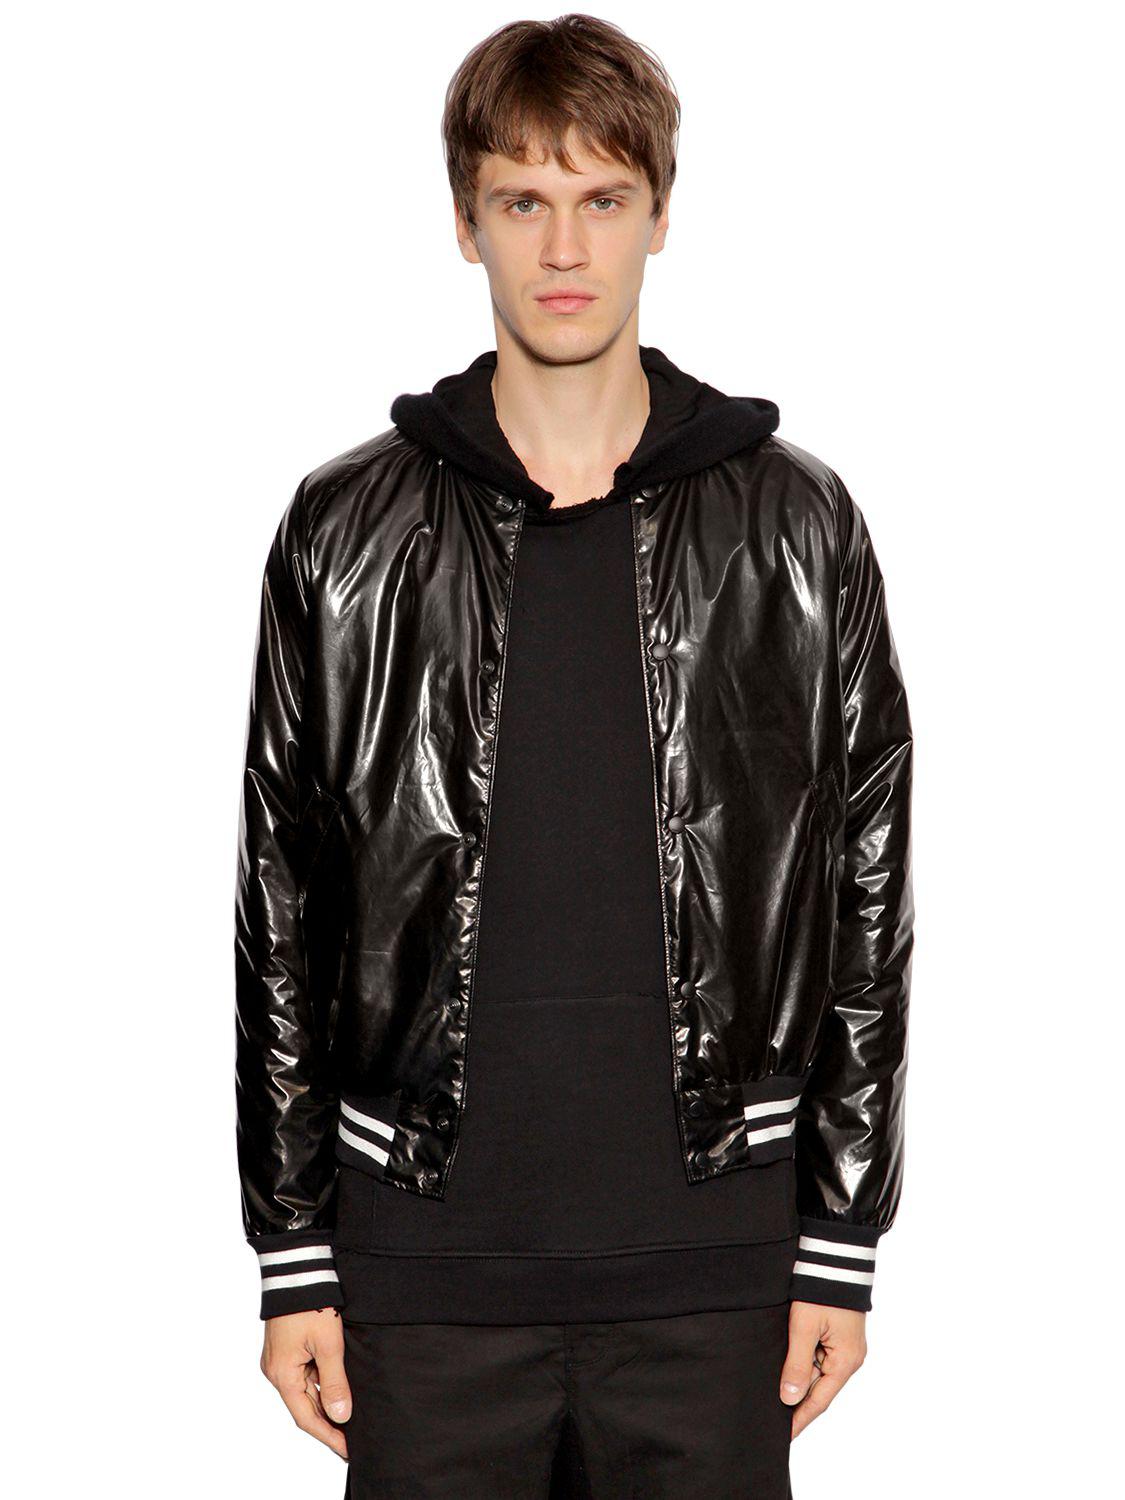 RTA Synthetic Logo Embroidered Shiny Bomber Jacket in Black for Men - Lyst